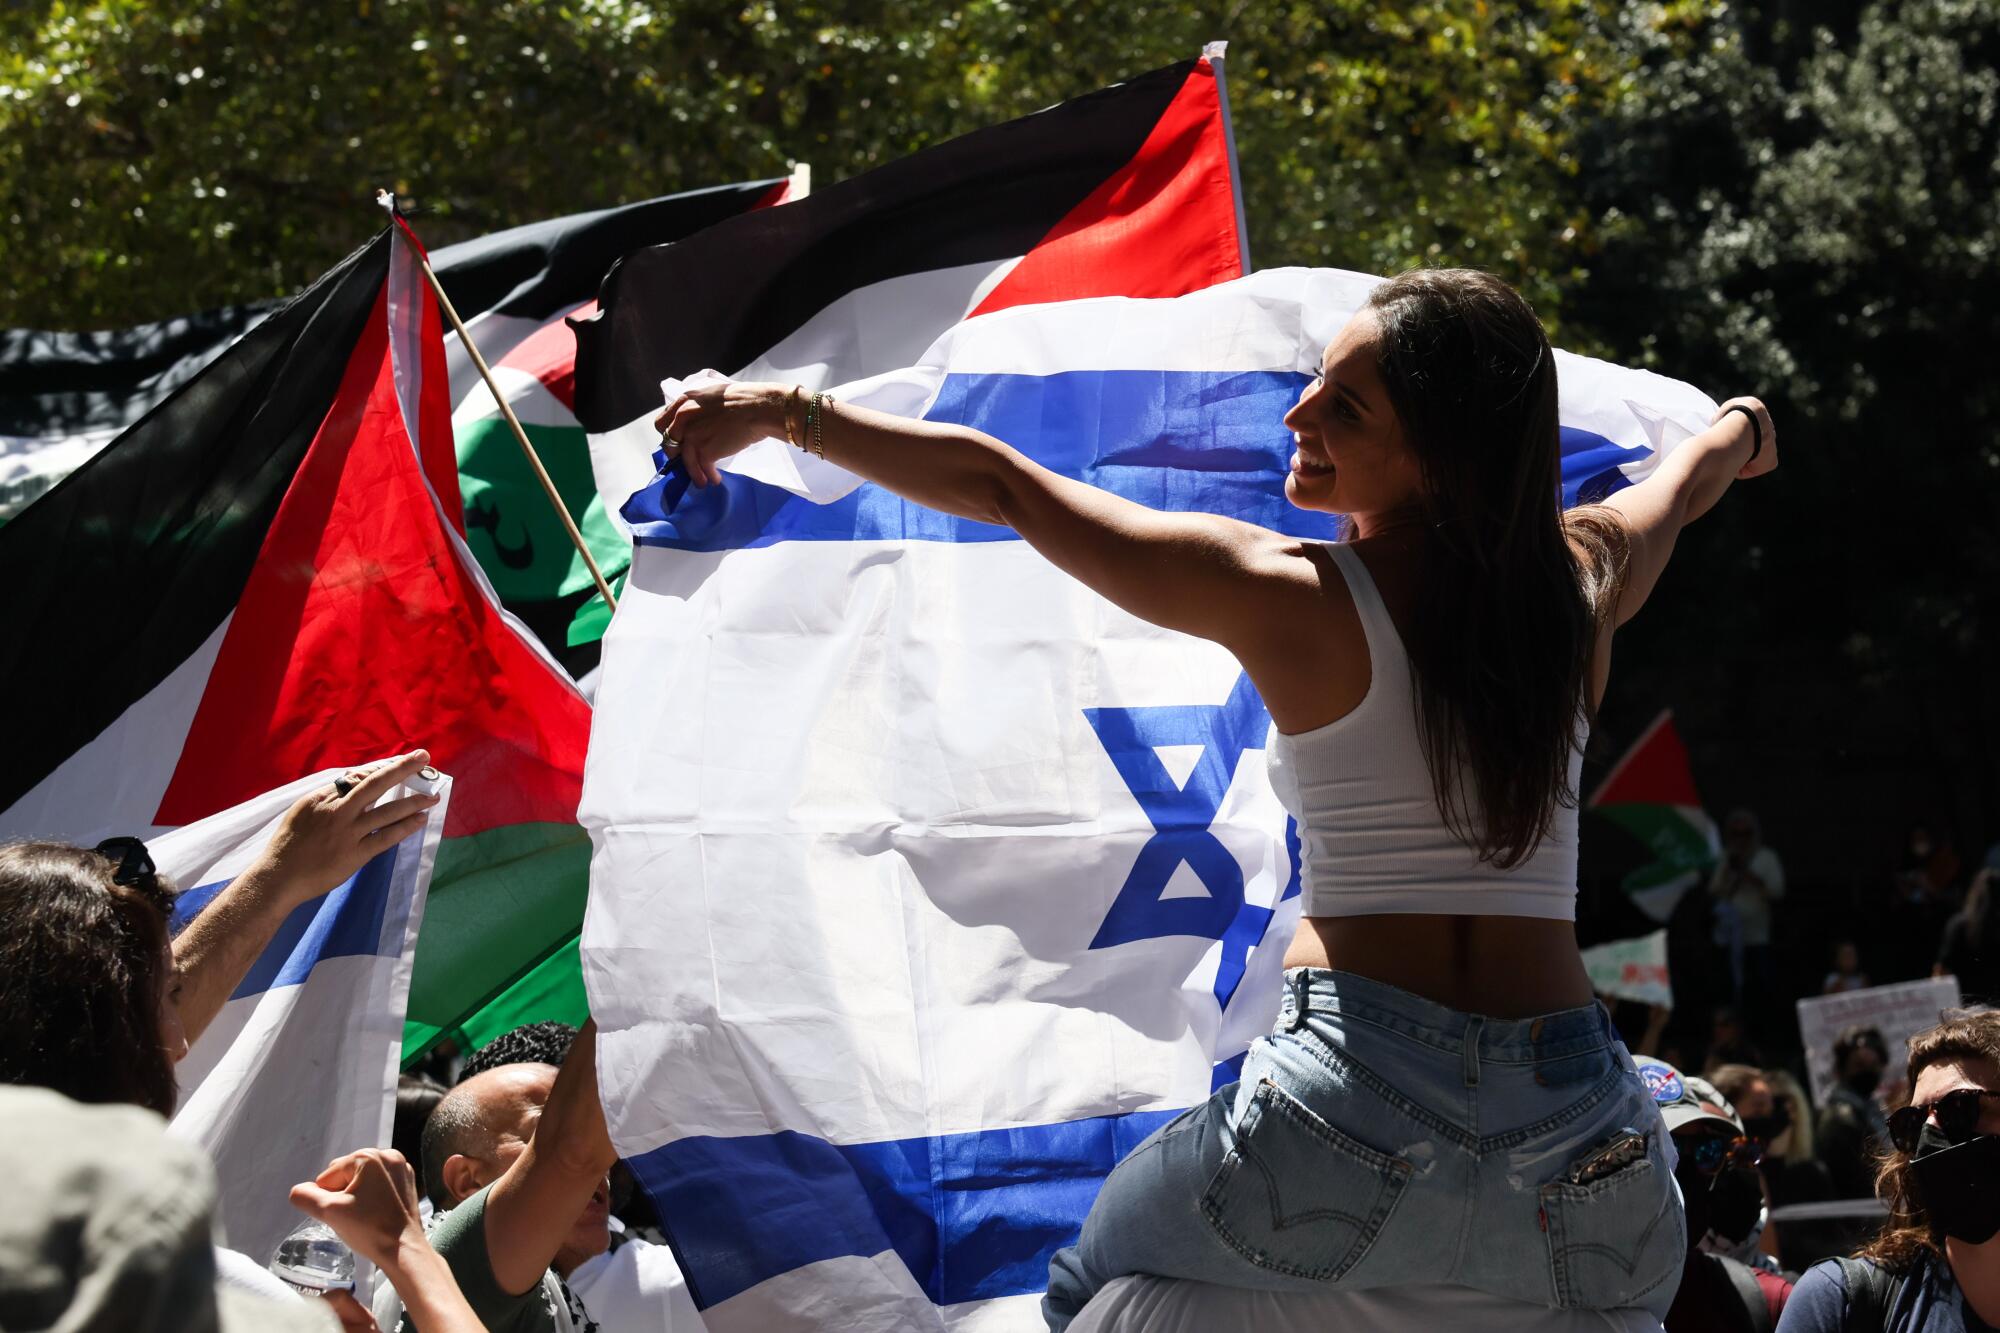 A protester in support of Israel waves an Israeli flag while surrounded by pro-Palestinian supporters. 